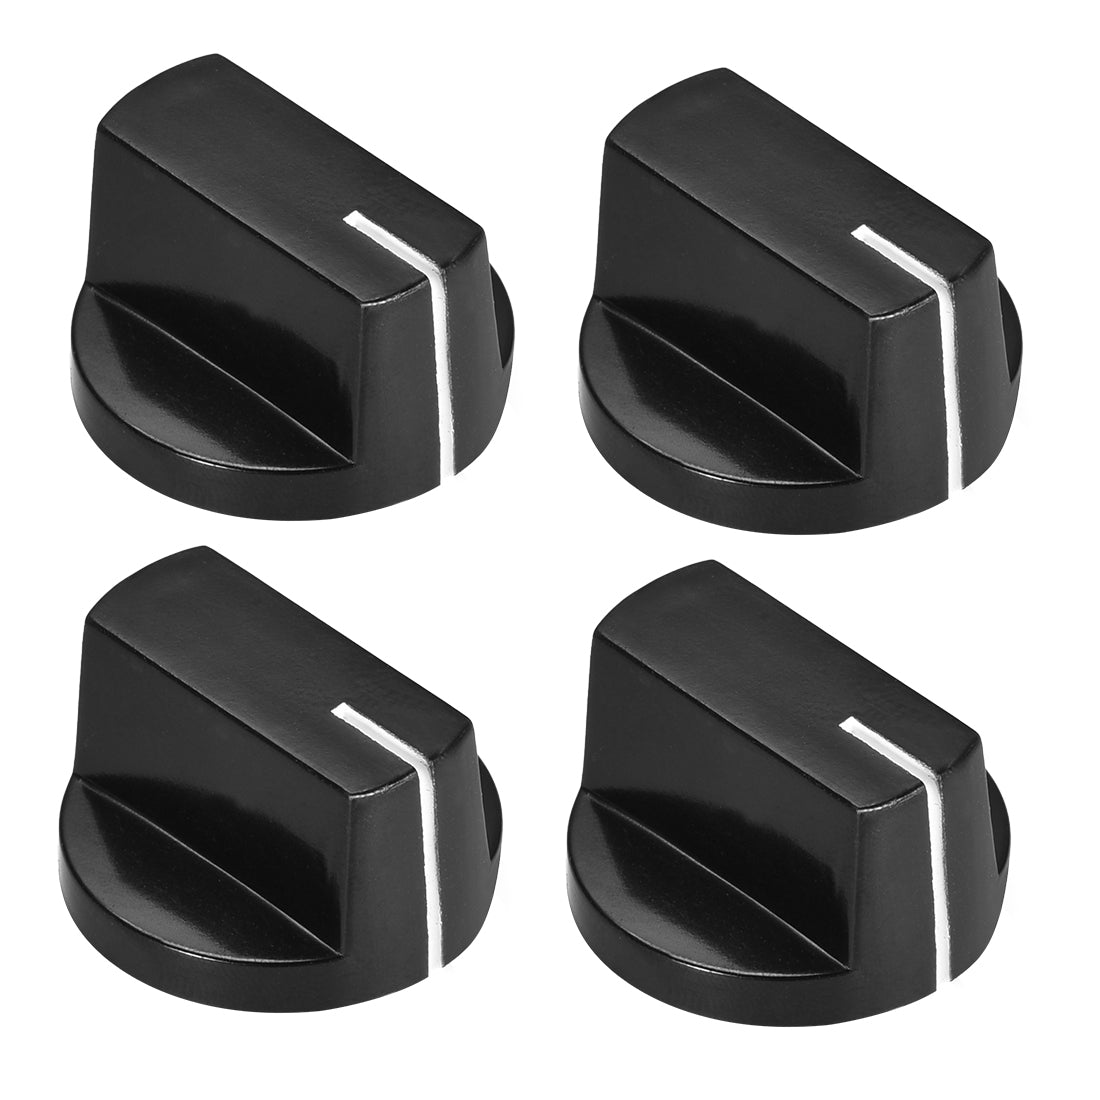 uxcell Uxcell 4pcs, 6mm Potentiometer Control Knobs For Guitar Acrylic Volume Tone Knobs Black